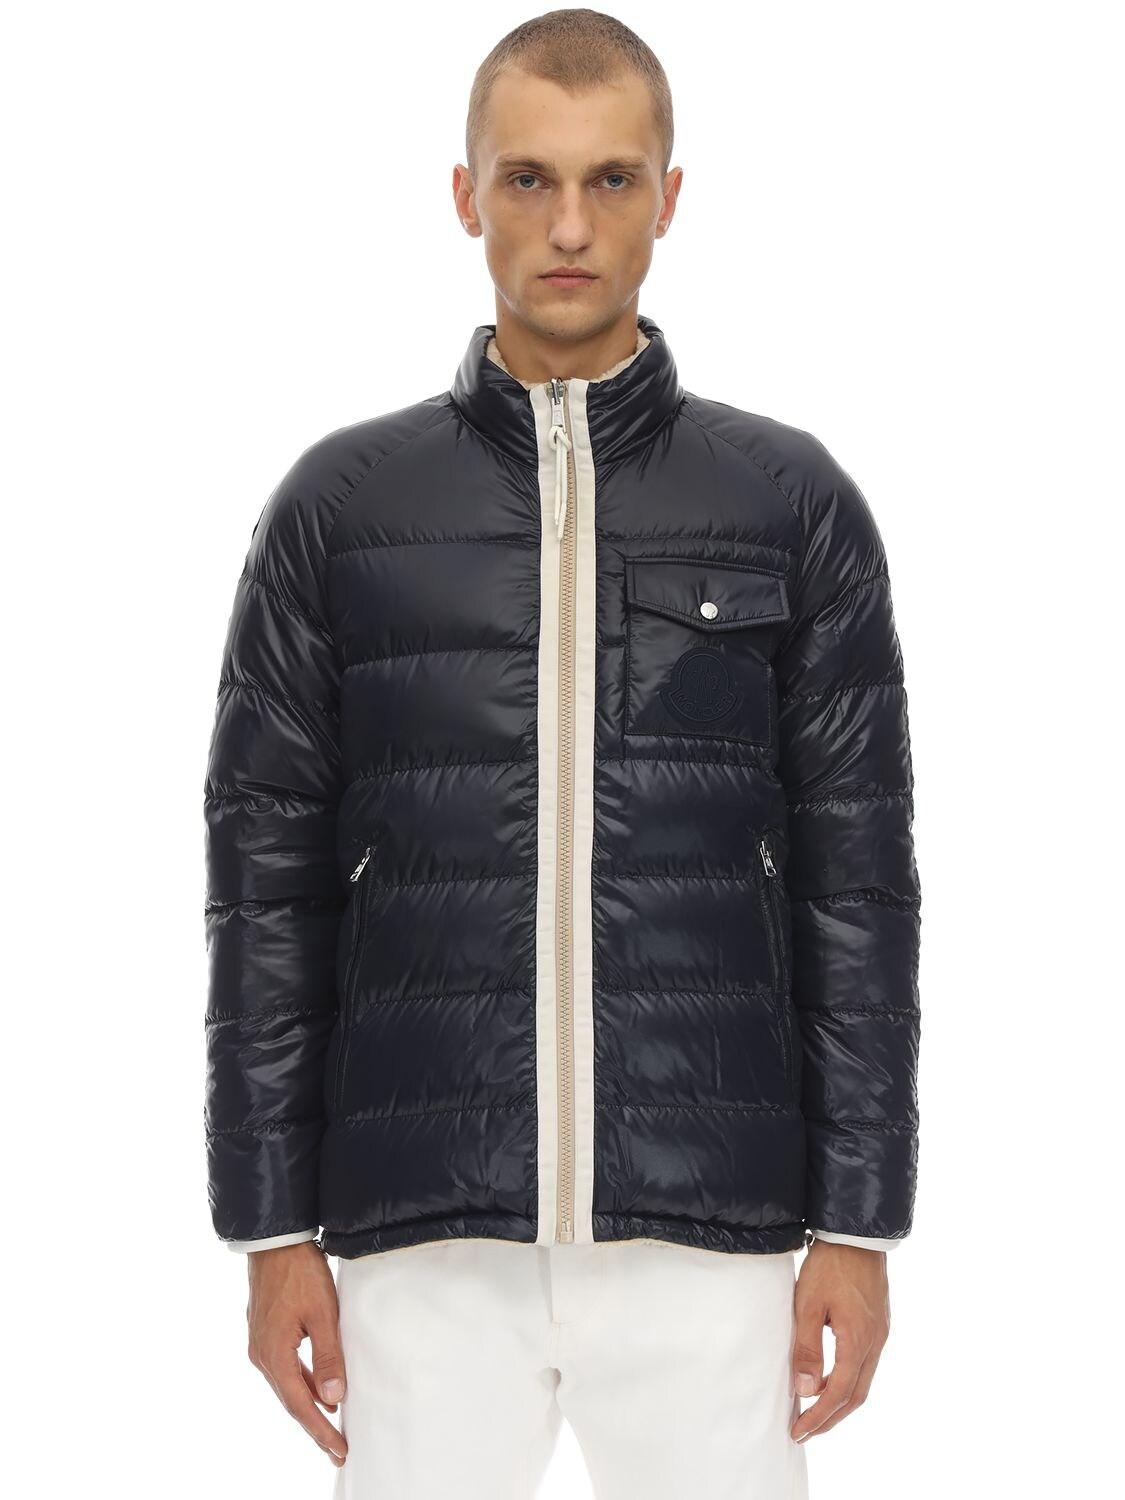 Moncler Genius 2 Moncler 1952 Reversible Fleece And Quilted Shell Down ...